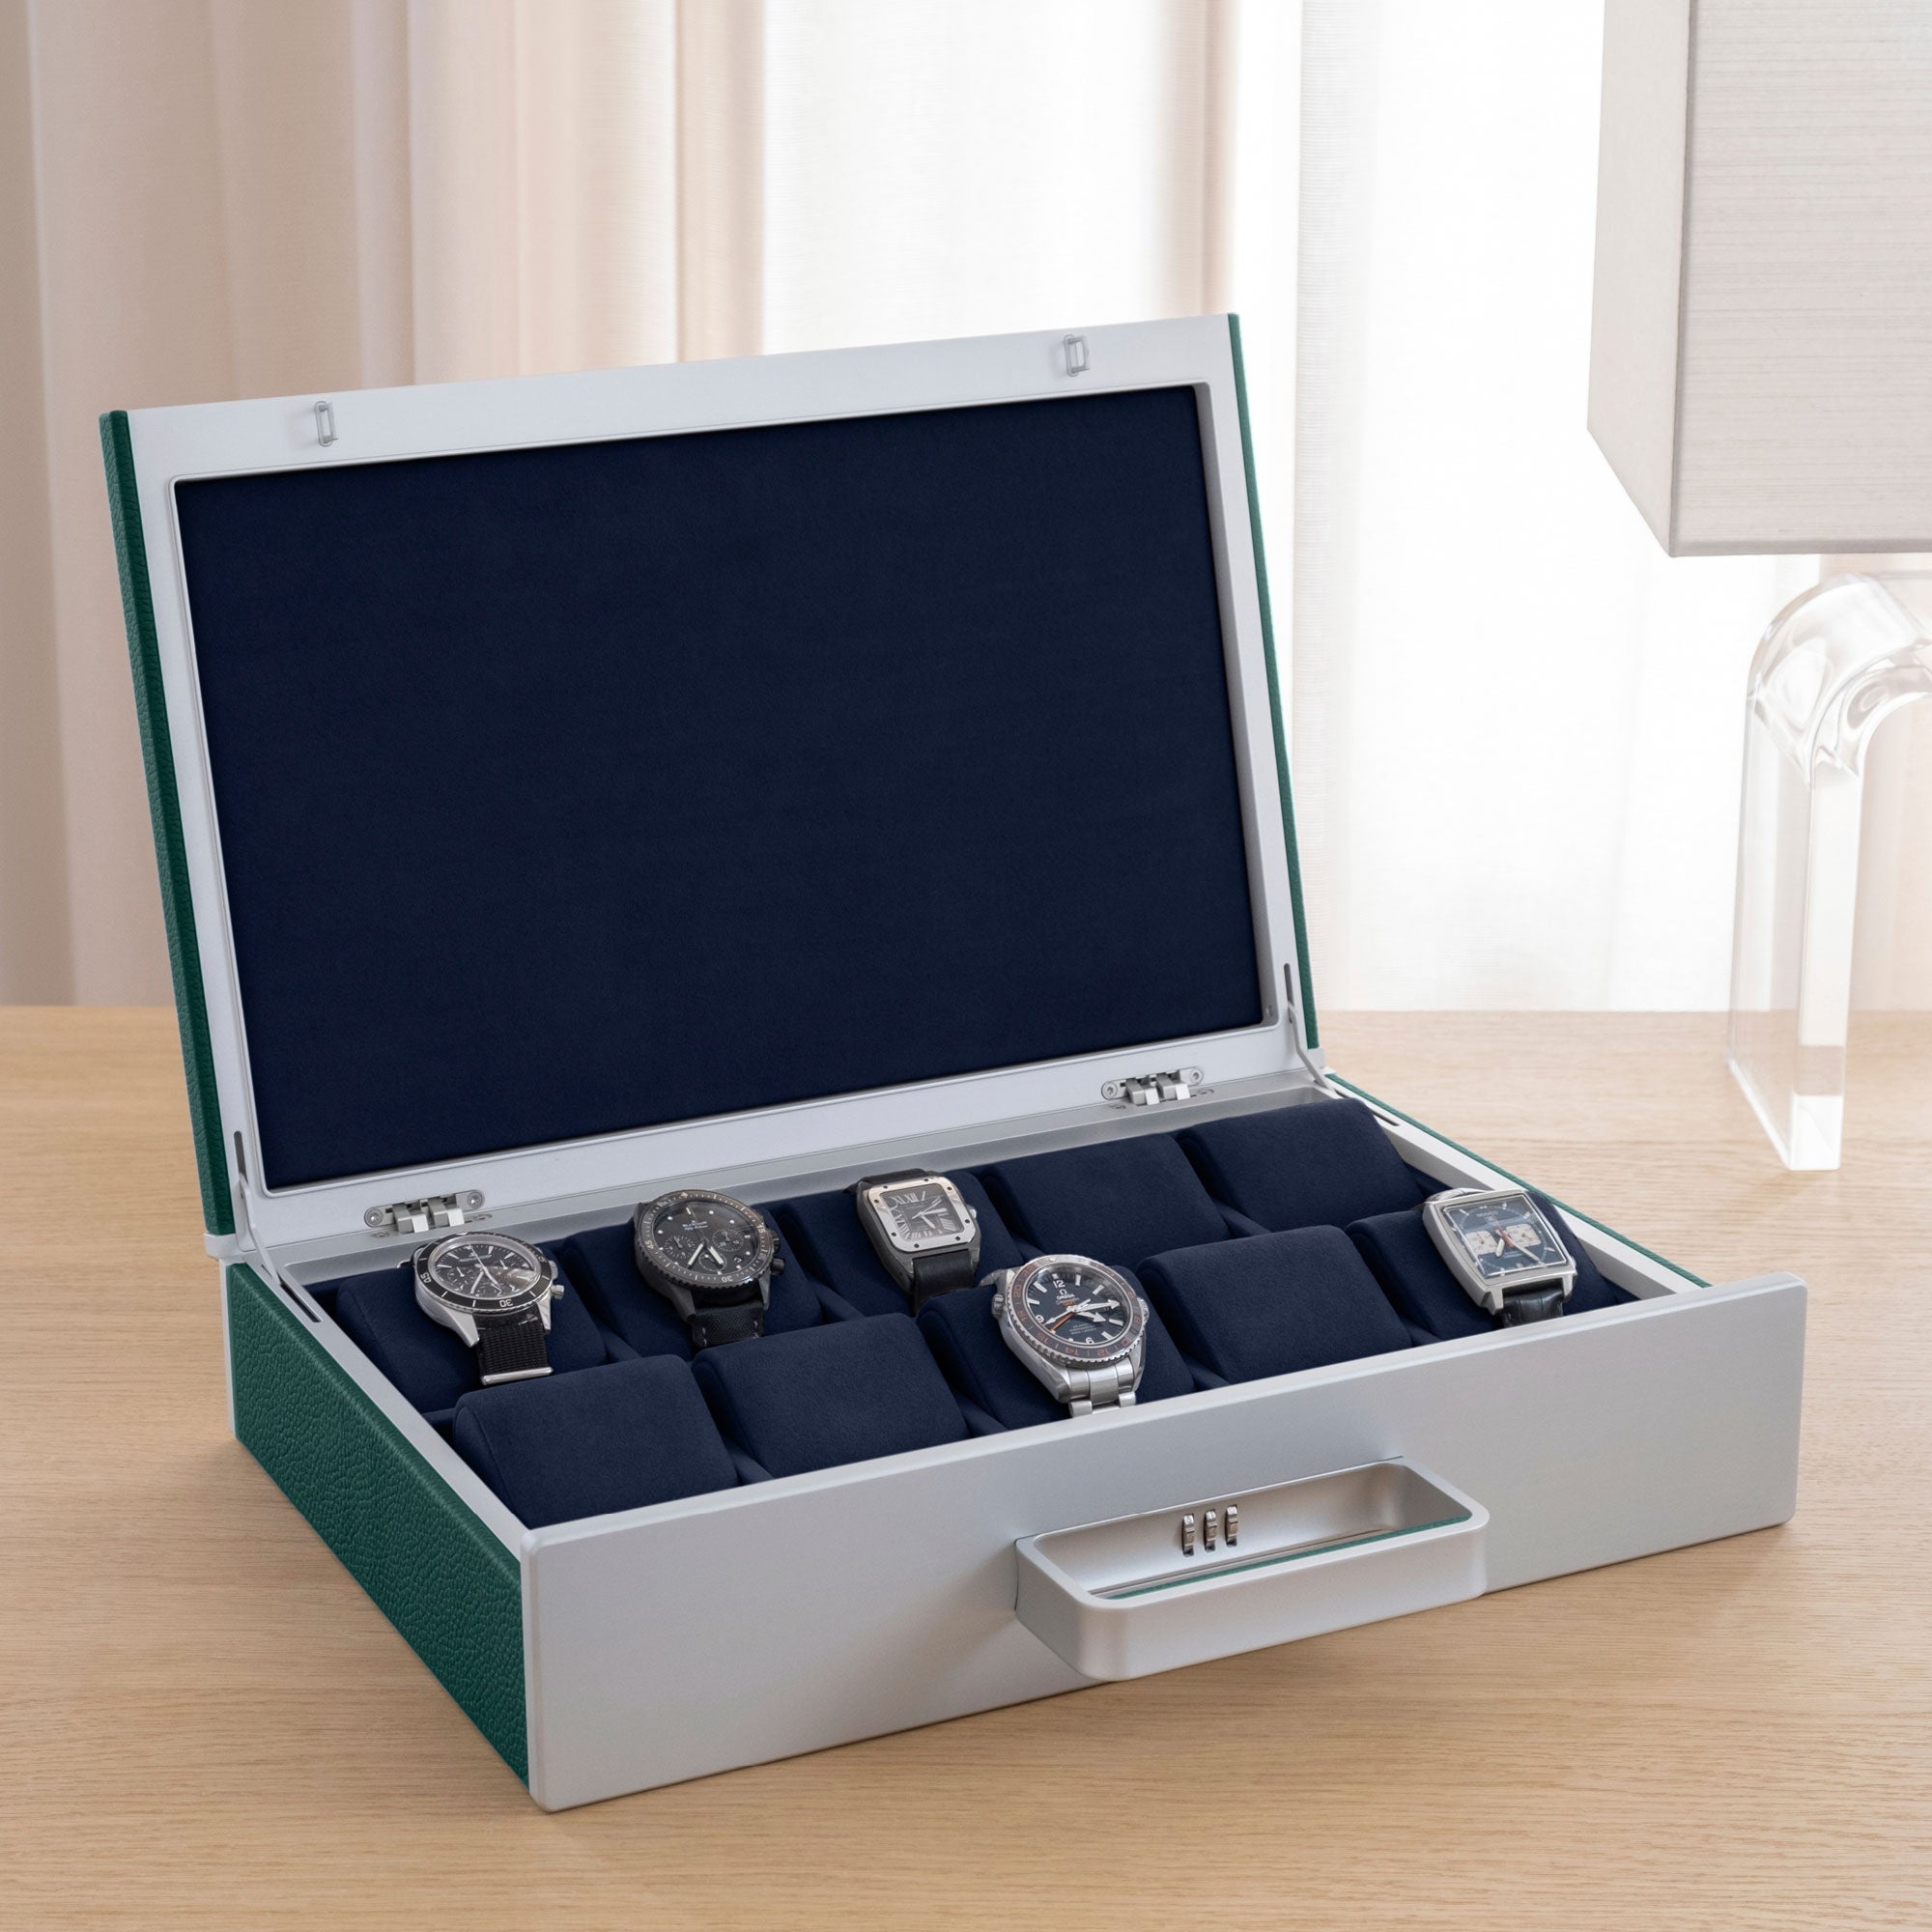 Designer Watch briefcase for 10 watches in emerald leather, carbon fiber and grey anodized aluminum and deep blue Alcantara interior with luxury watches including Blancpain, Tag Heuer and Jaeger-LeCoultre